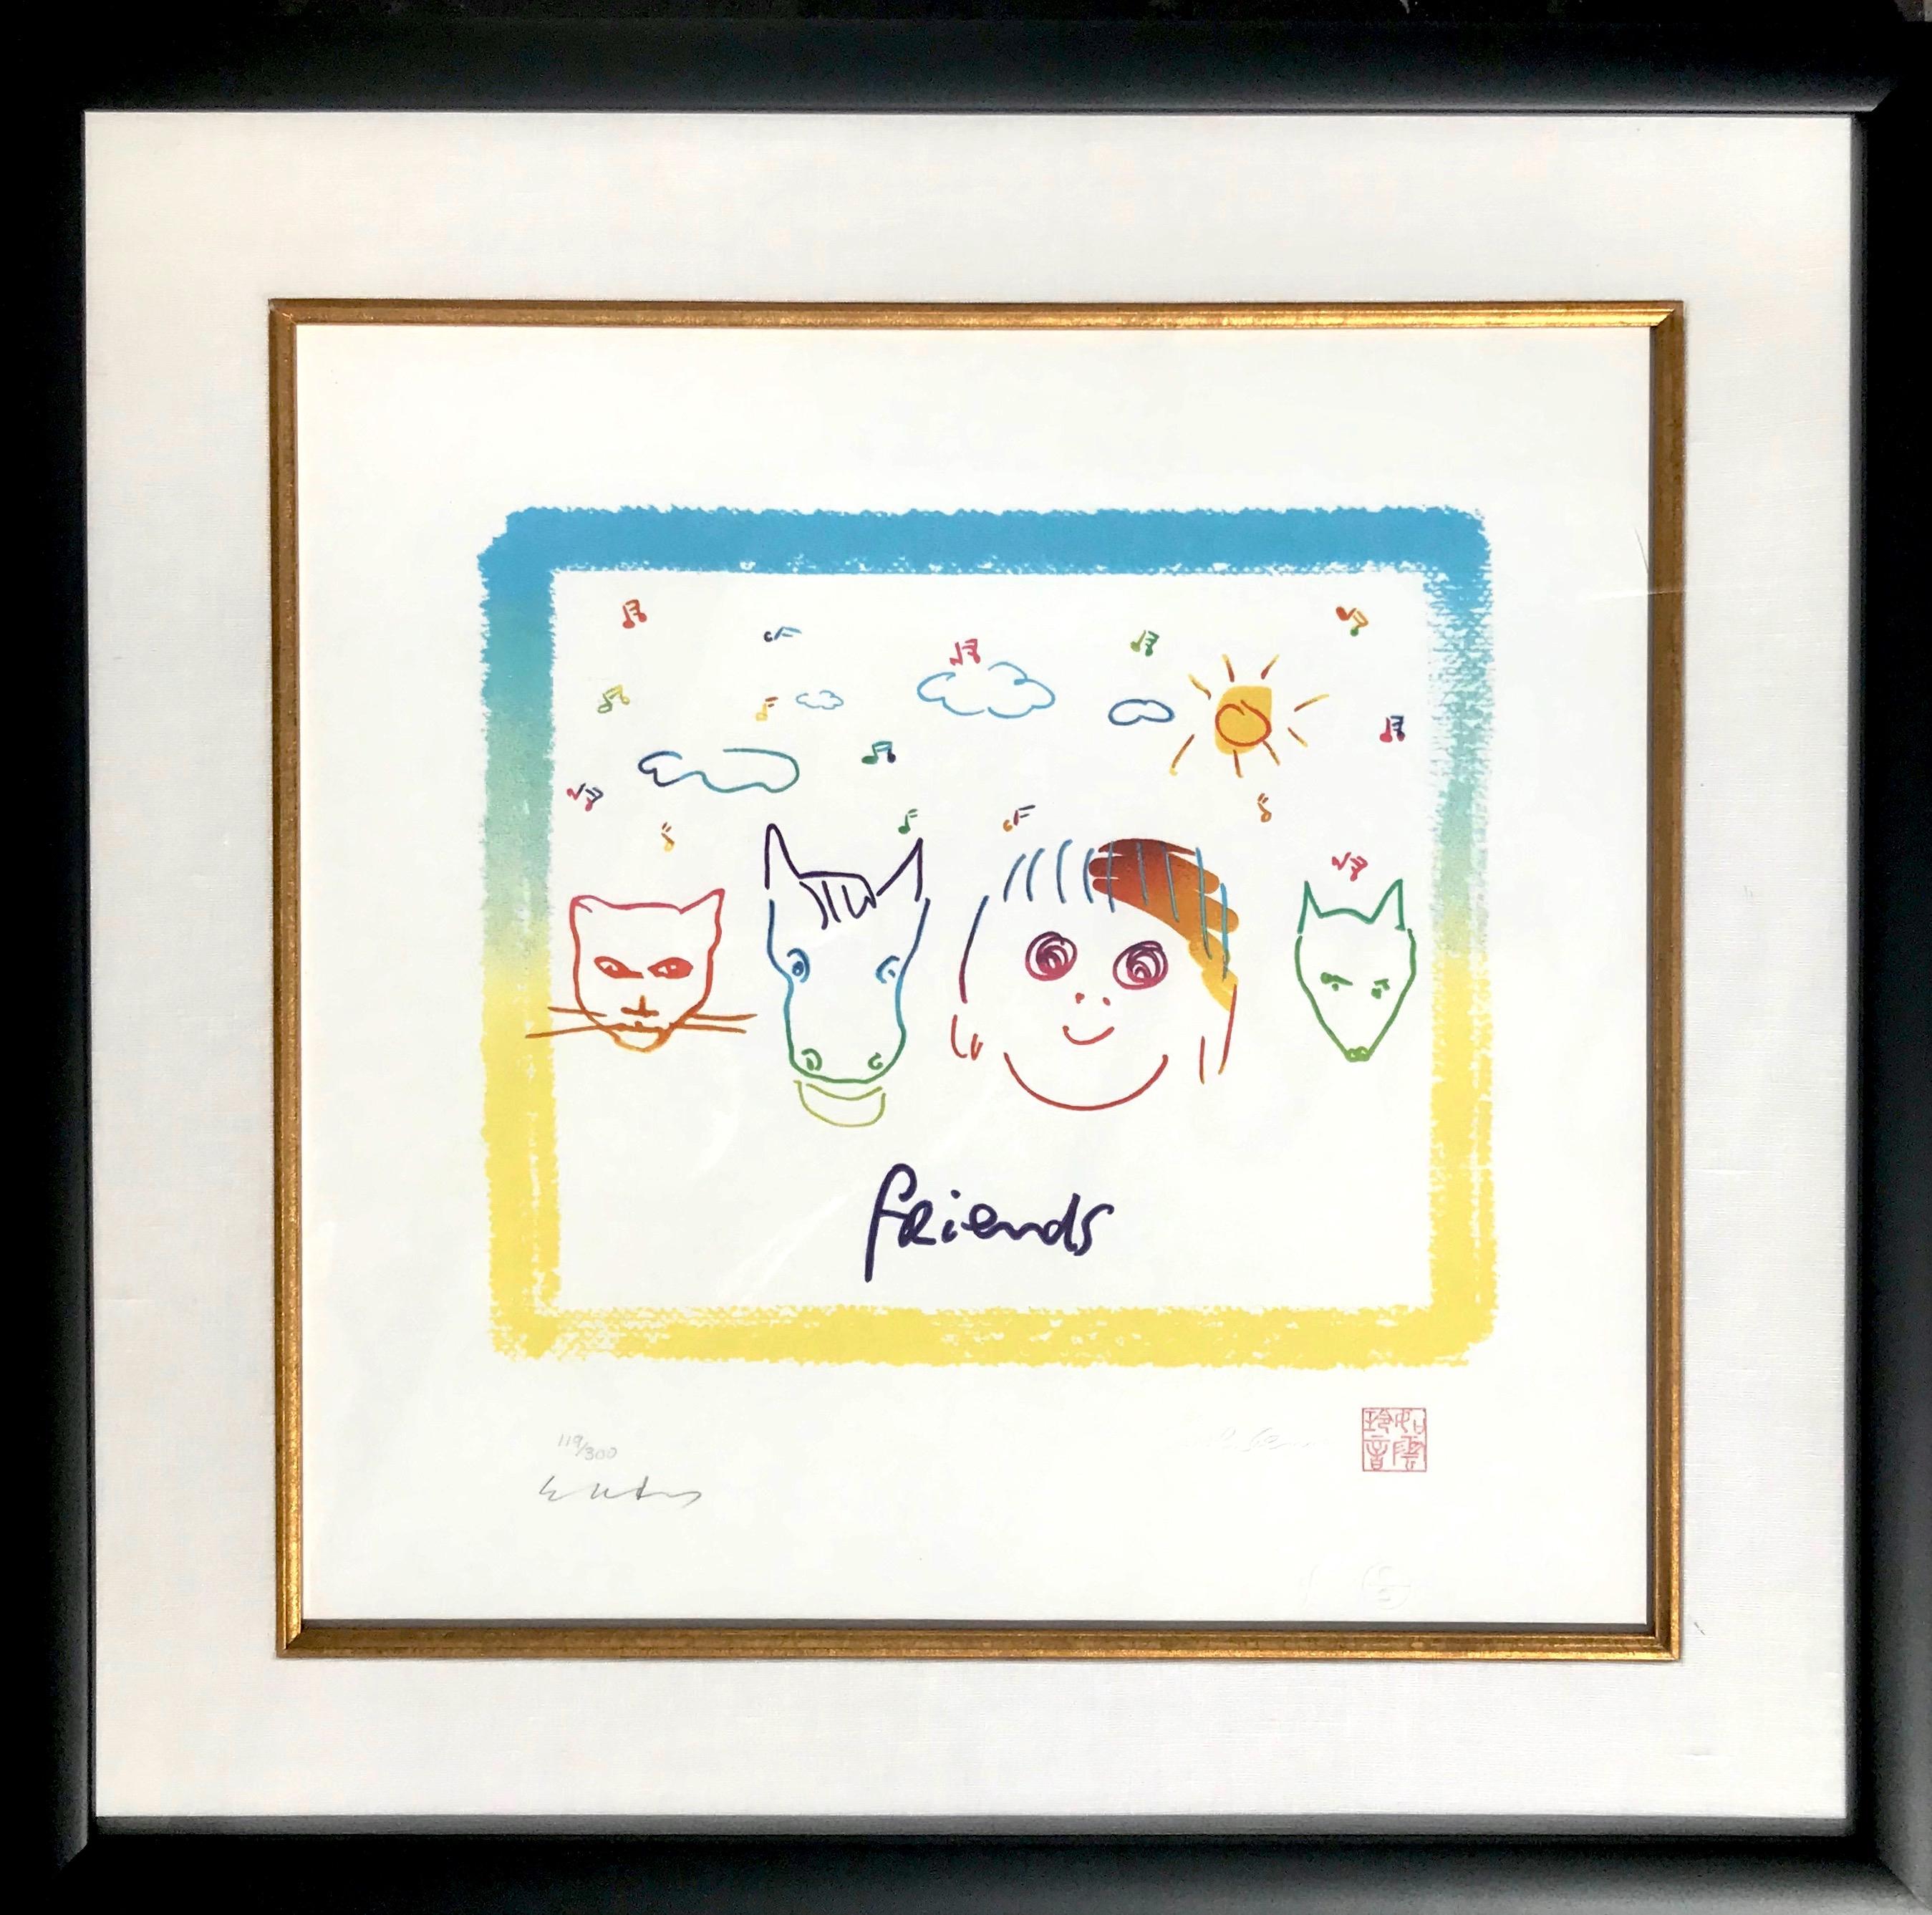 John Lennon Print - "Friends" Limited Edition Drawing From "Real Love" Collection